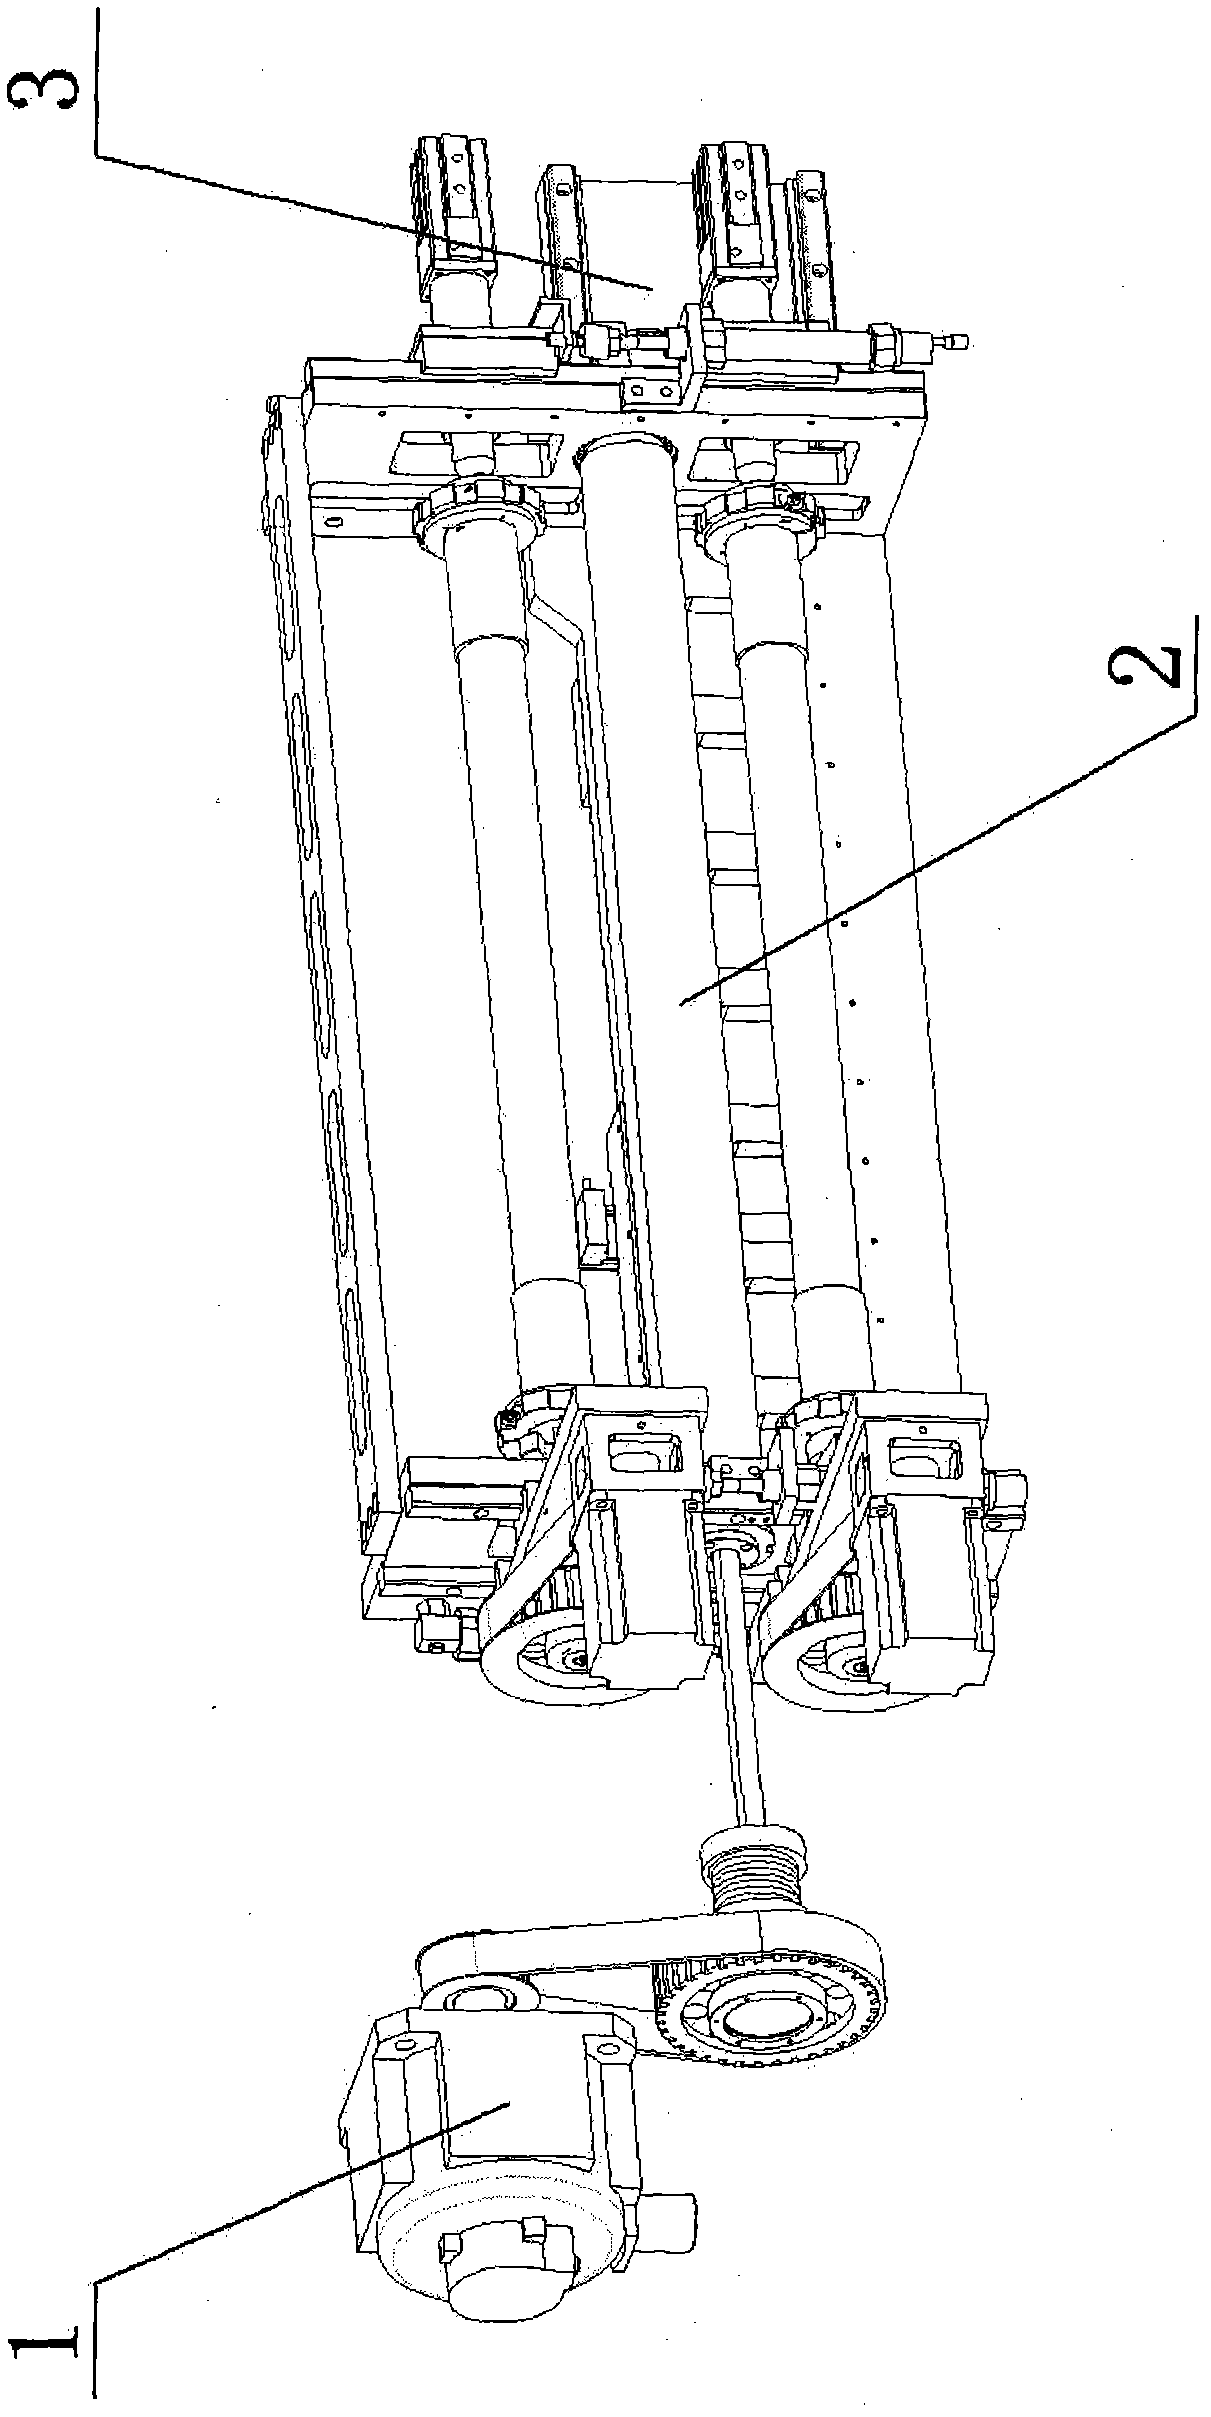 Foil stamping device of stamping machine